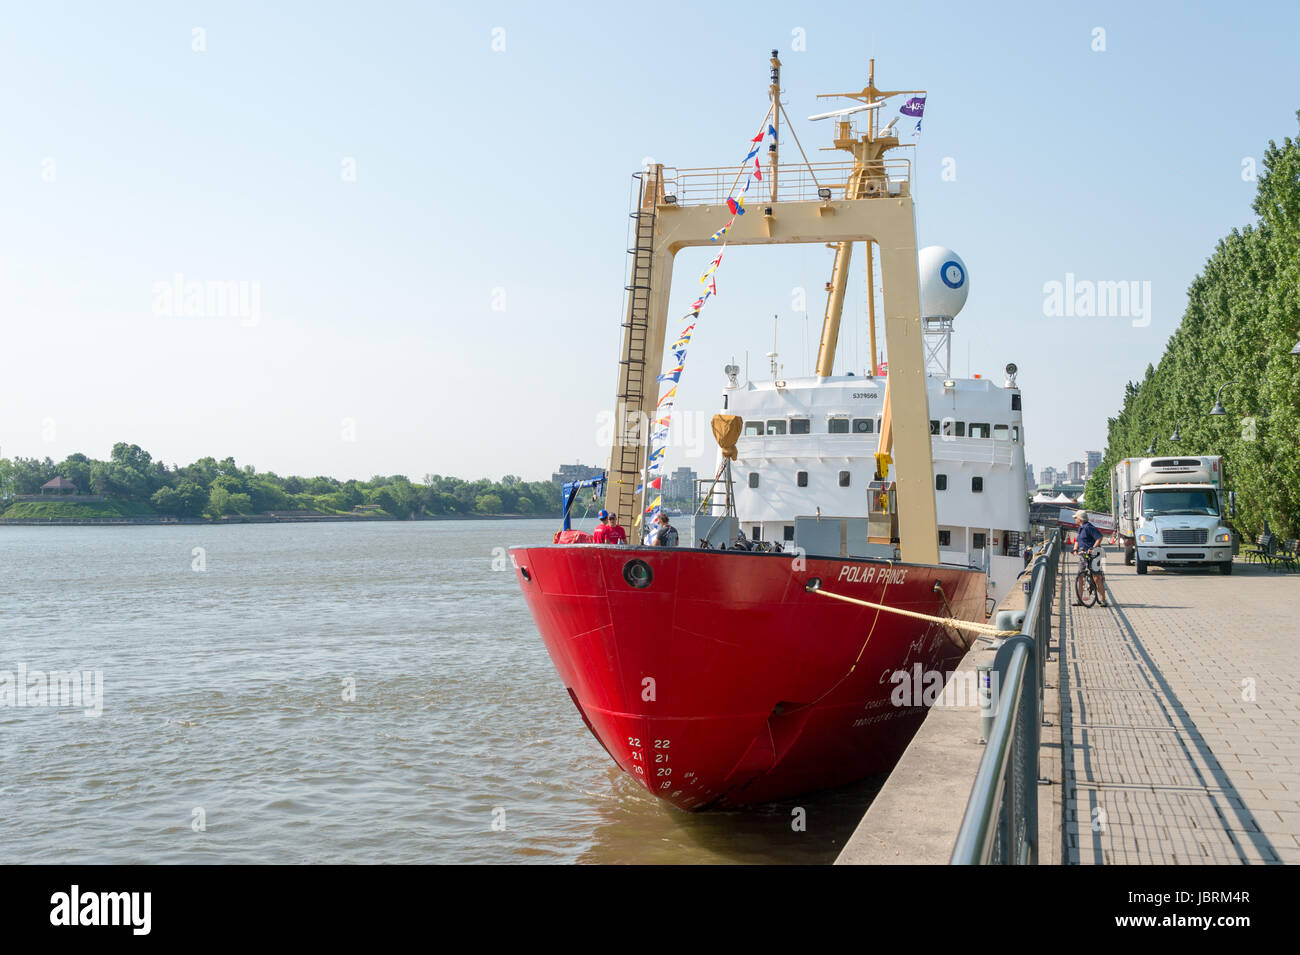 Montreal, Canada. 12th Jun, 2017. Icebreaker C3 cruising the Northwest Passage from Toronto to Victoria is moored in Montreal Old Port Credit: Marc Bruxelle/Alamy Live News Stock Photo